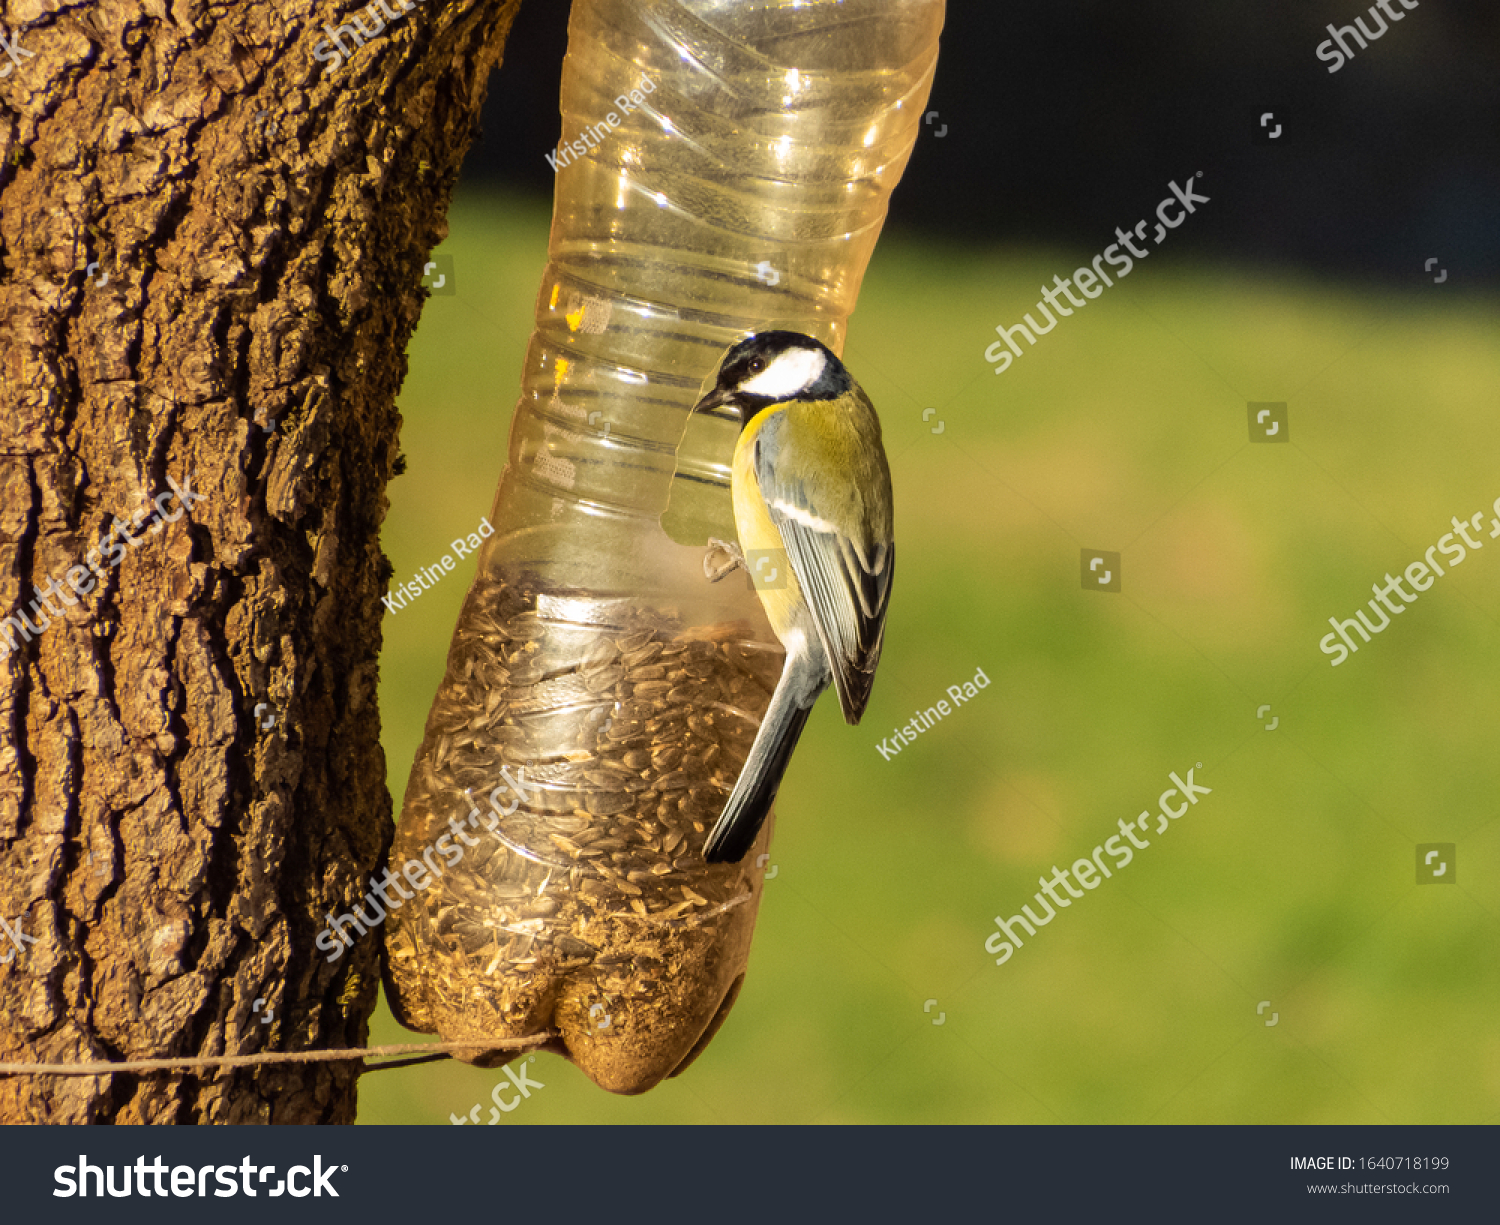 Great tit (Parus major) visiting bird feeder made from reused plastic bottle full with grains in a winter day Bird feeder bottle hanging in the tree. Great tit sitting on the side of the bottle feeder #1640718199